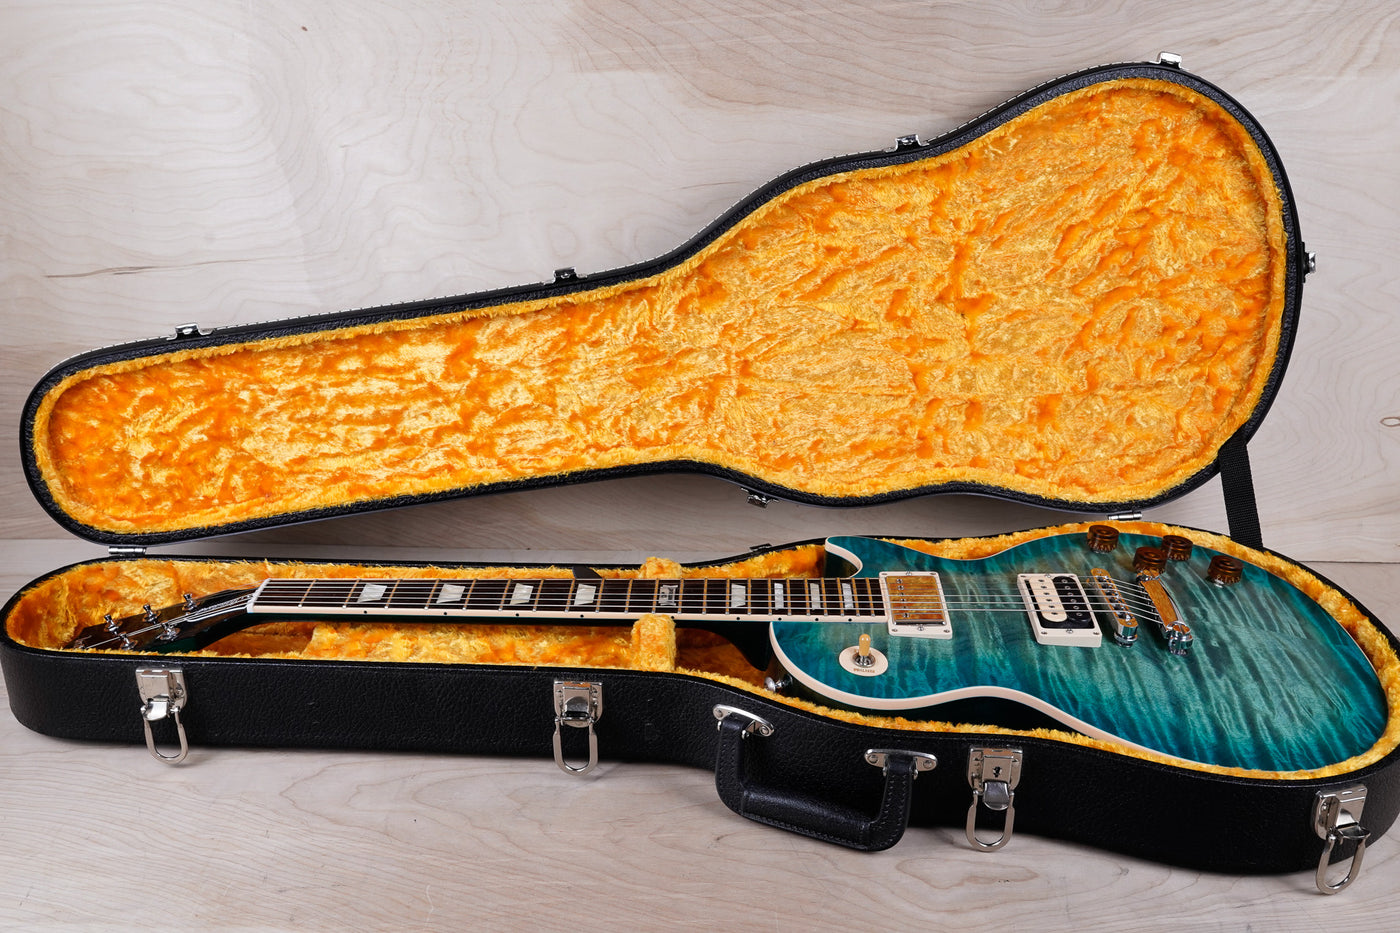 Gibson Les Paul Standard Employee Hand-Selected and Bookmatched AAA Premium Plus 2014 Ocean Water Perimeter w/ Lifton Hard Case